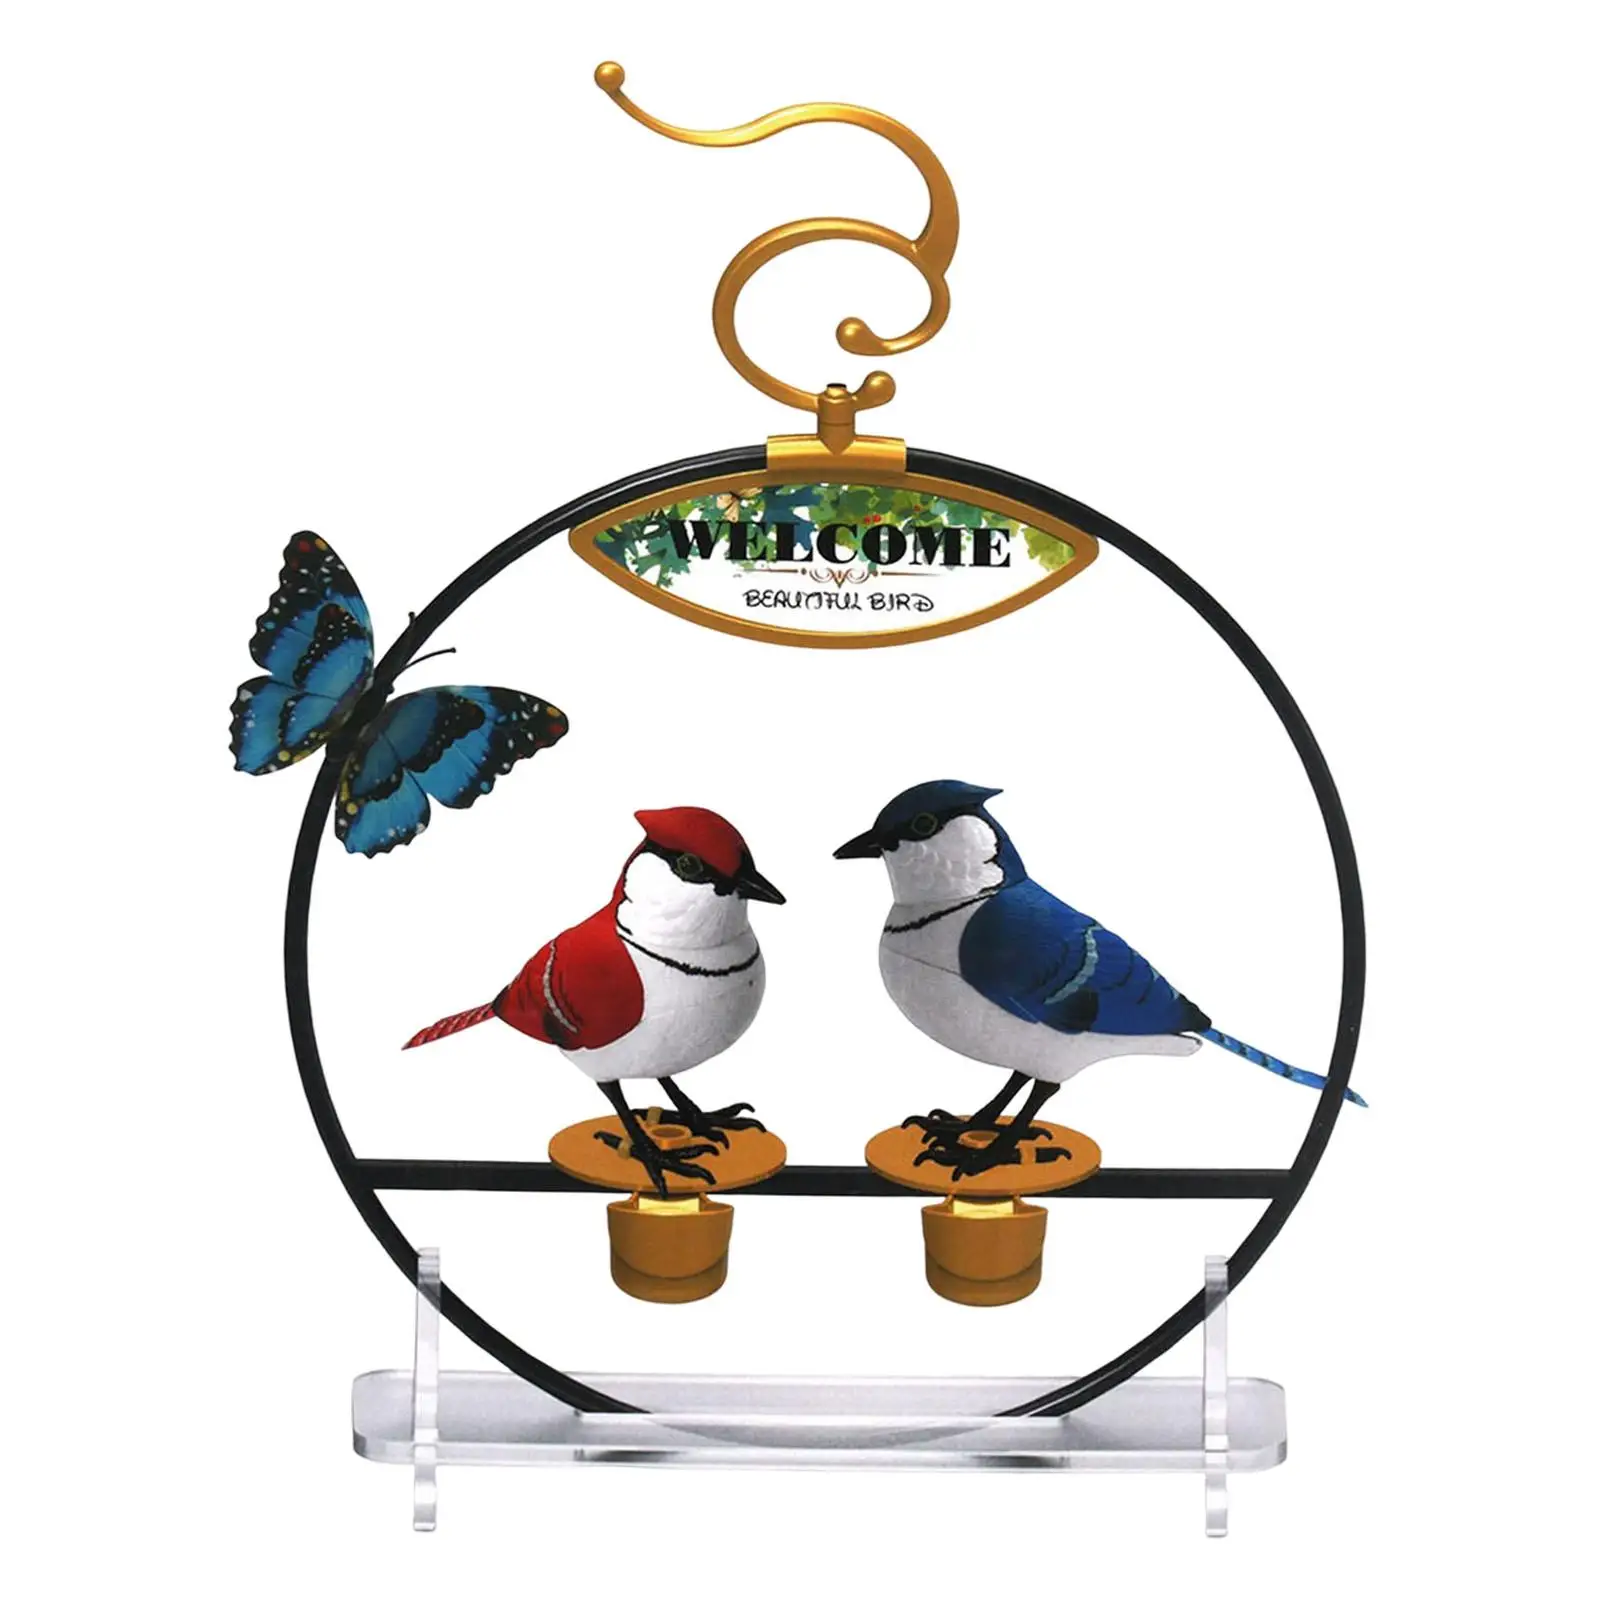 Adorable Sound Activated Chirping Bird with Voice Sensor Singing Chirping Dancing Parrots Birds Kids Children Toys